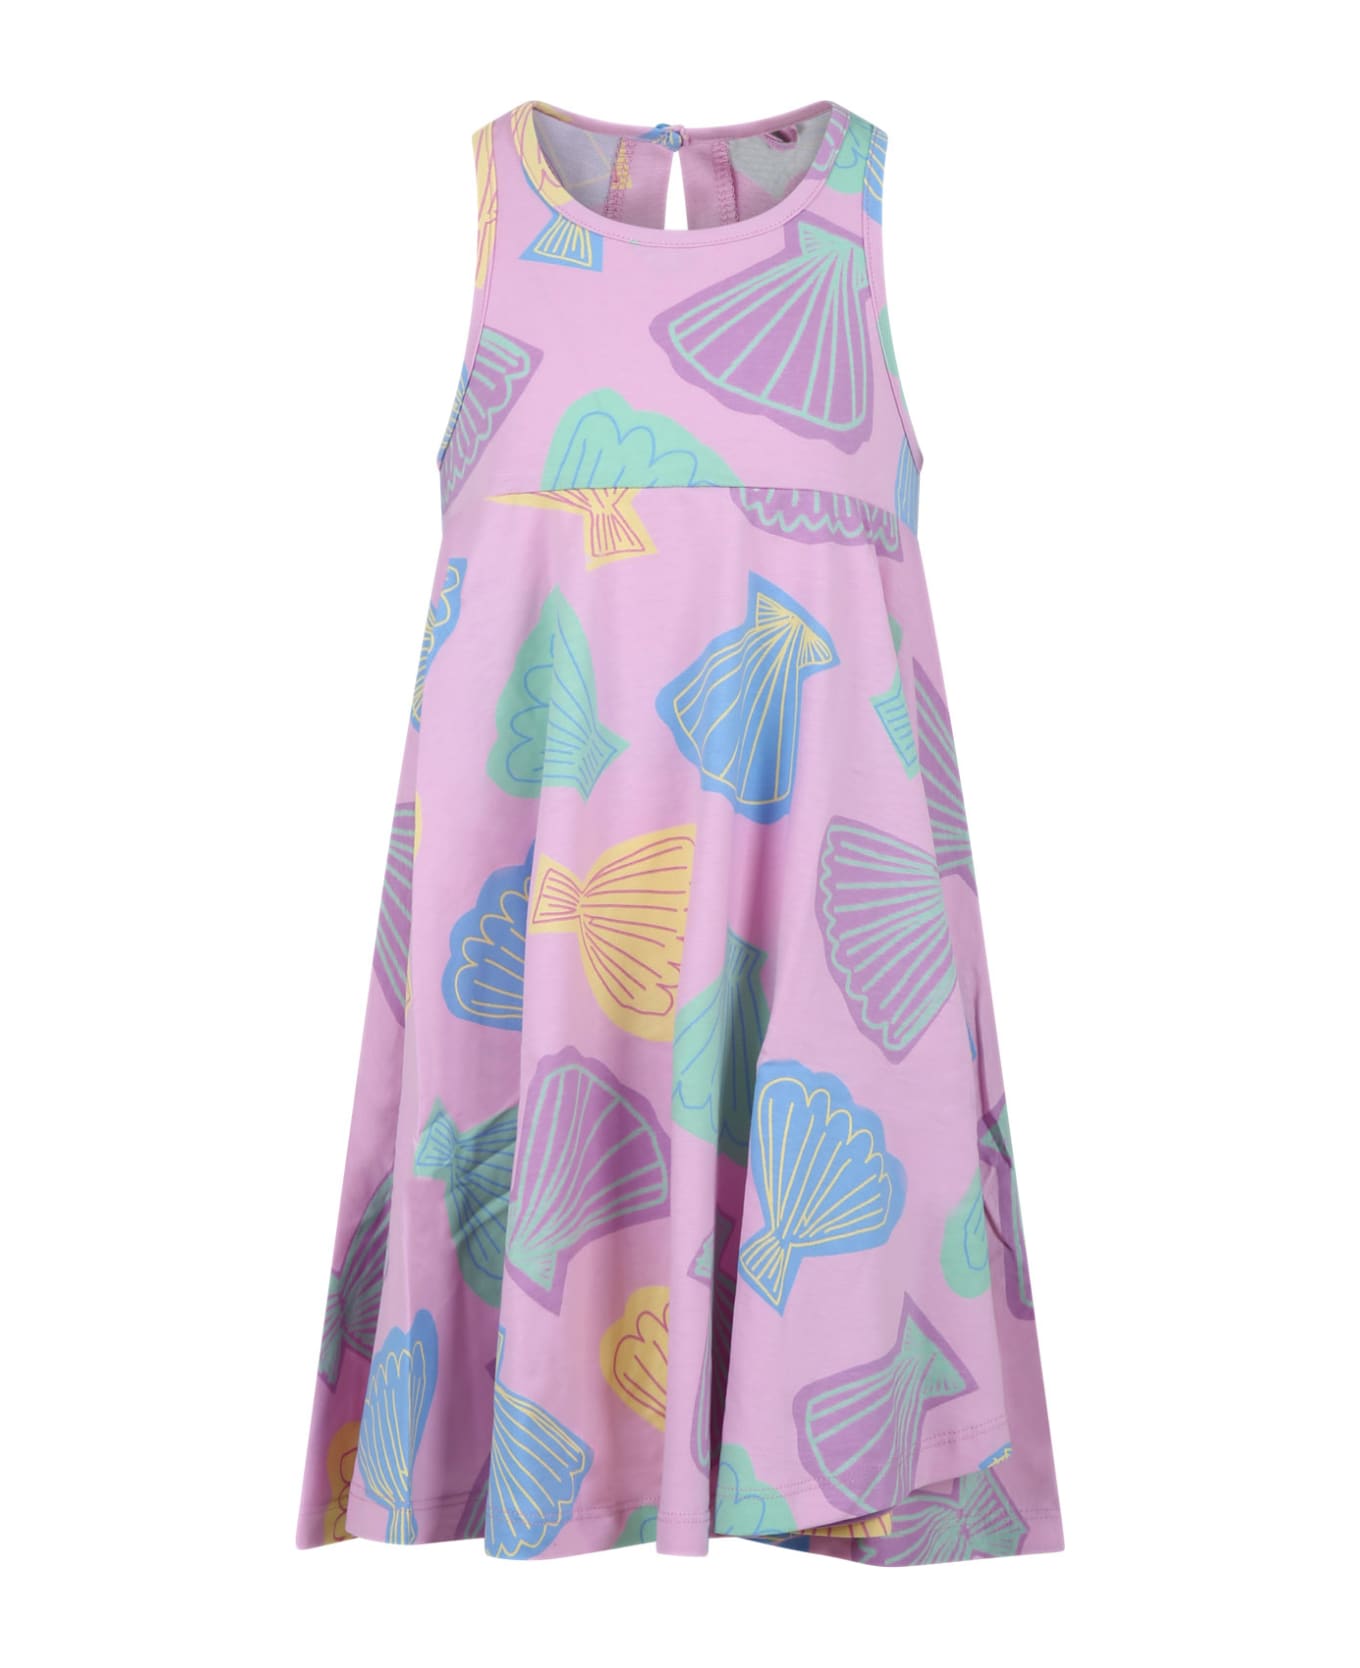 Stella McCartney Kids Pink Dress For Girl With All-over Multicolor Print - Pink